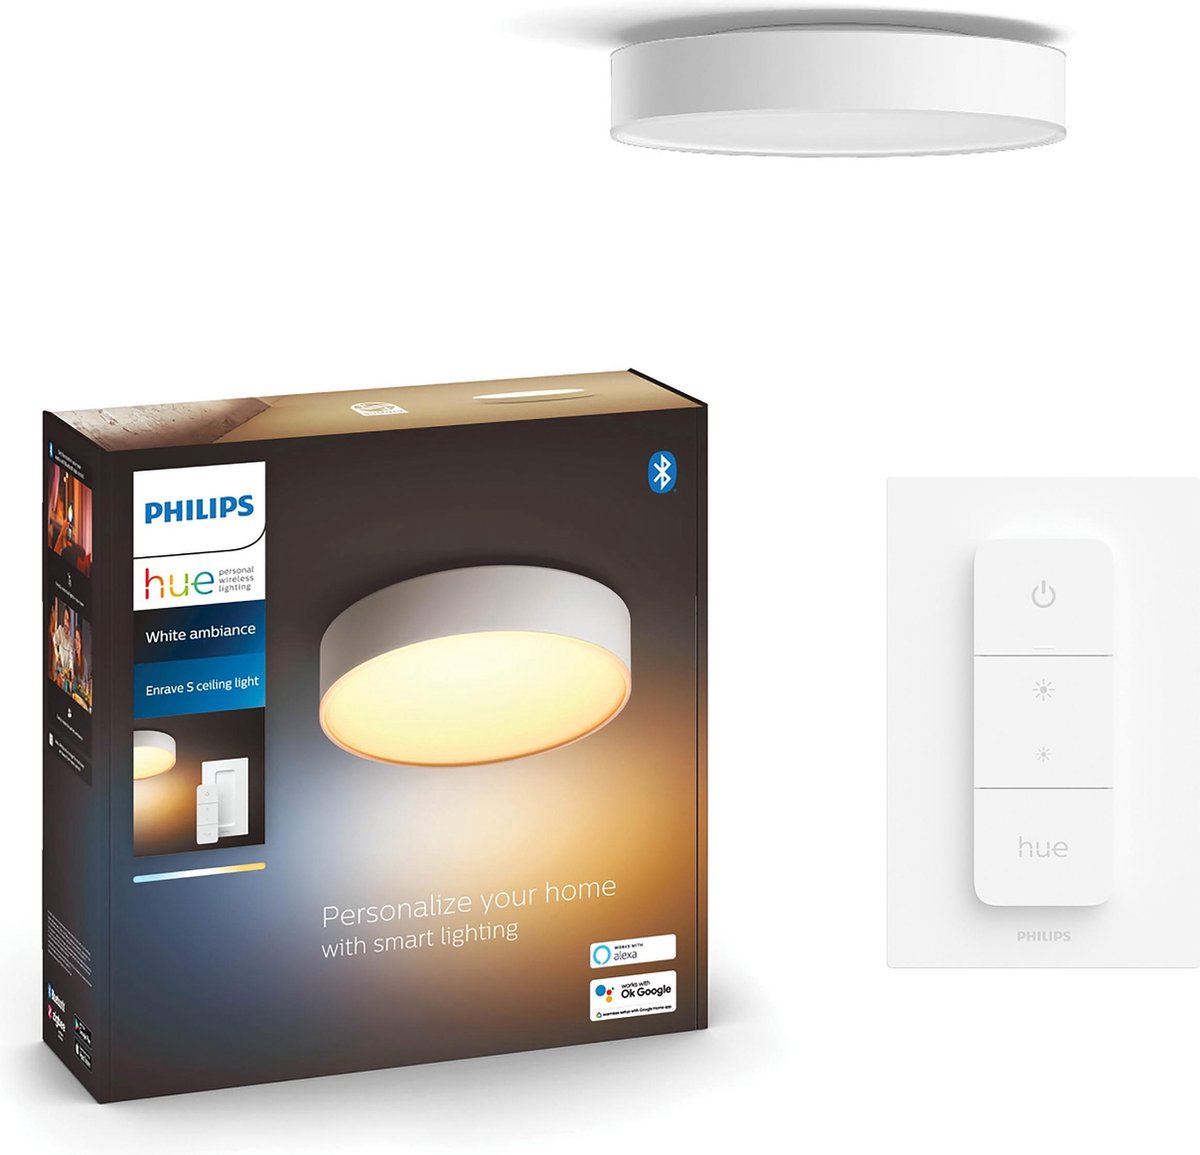 Philips Hue Enrave Small White Ambiance Plafondlamp Wit